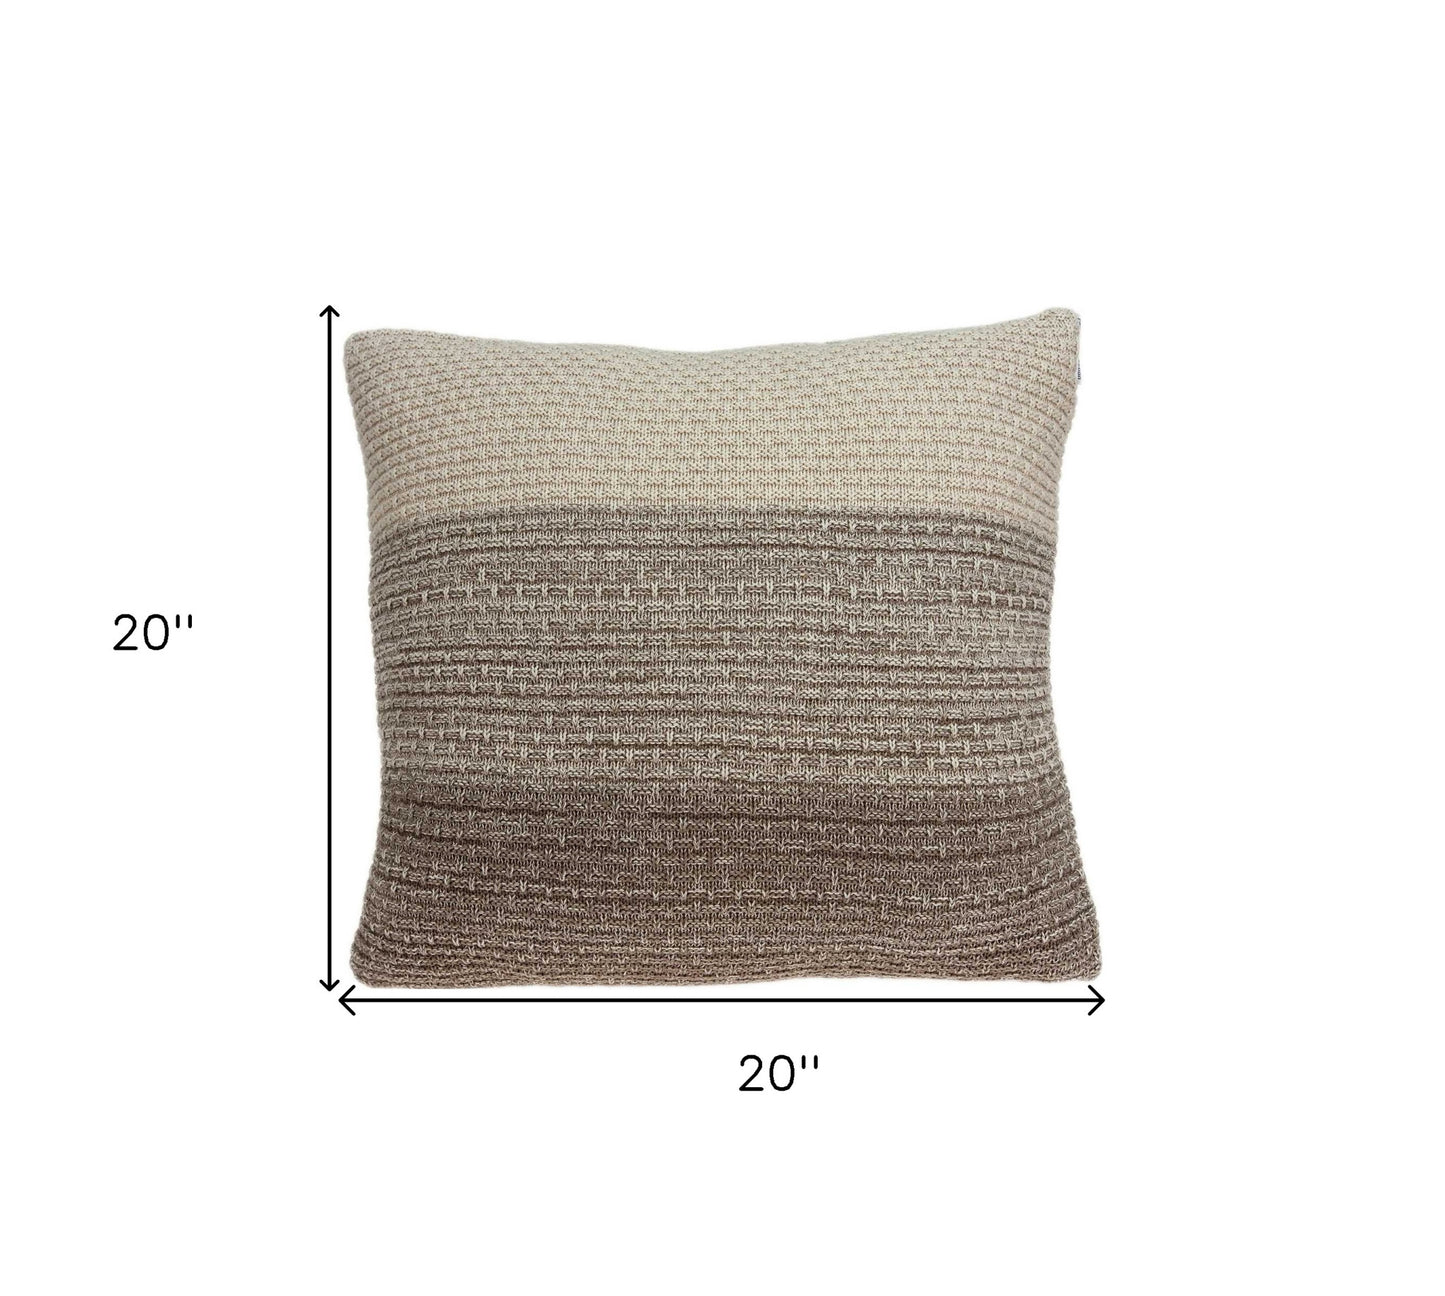 20" X 20" Beige and Brown Cotton Pillow